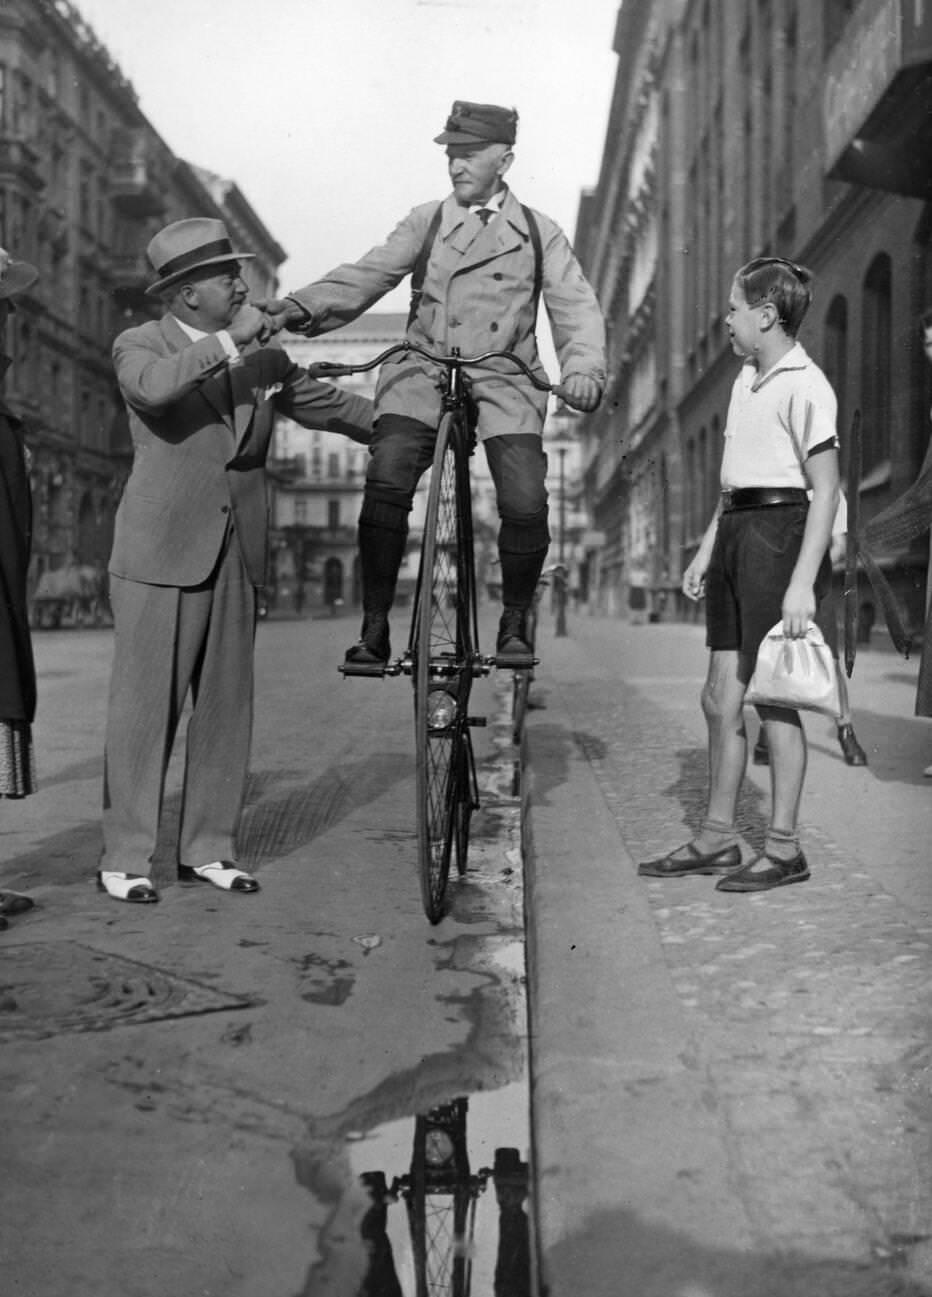 Victorian-dressed man on a penny-farthing, Cambridge, June 1947.